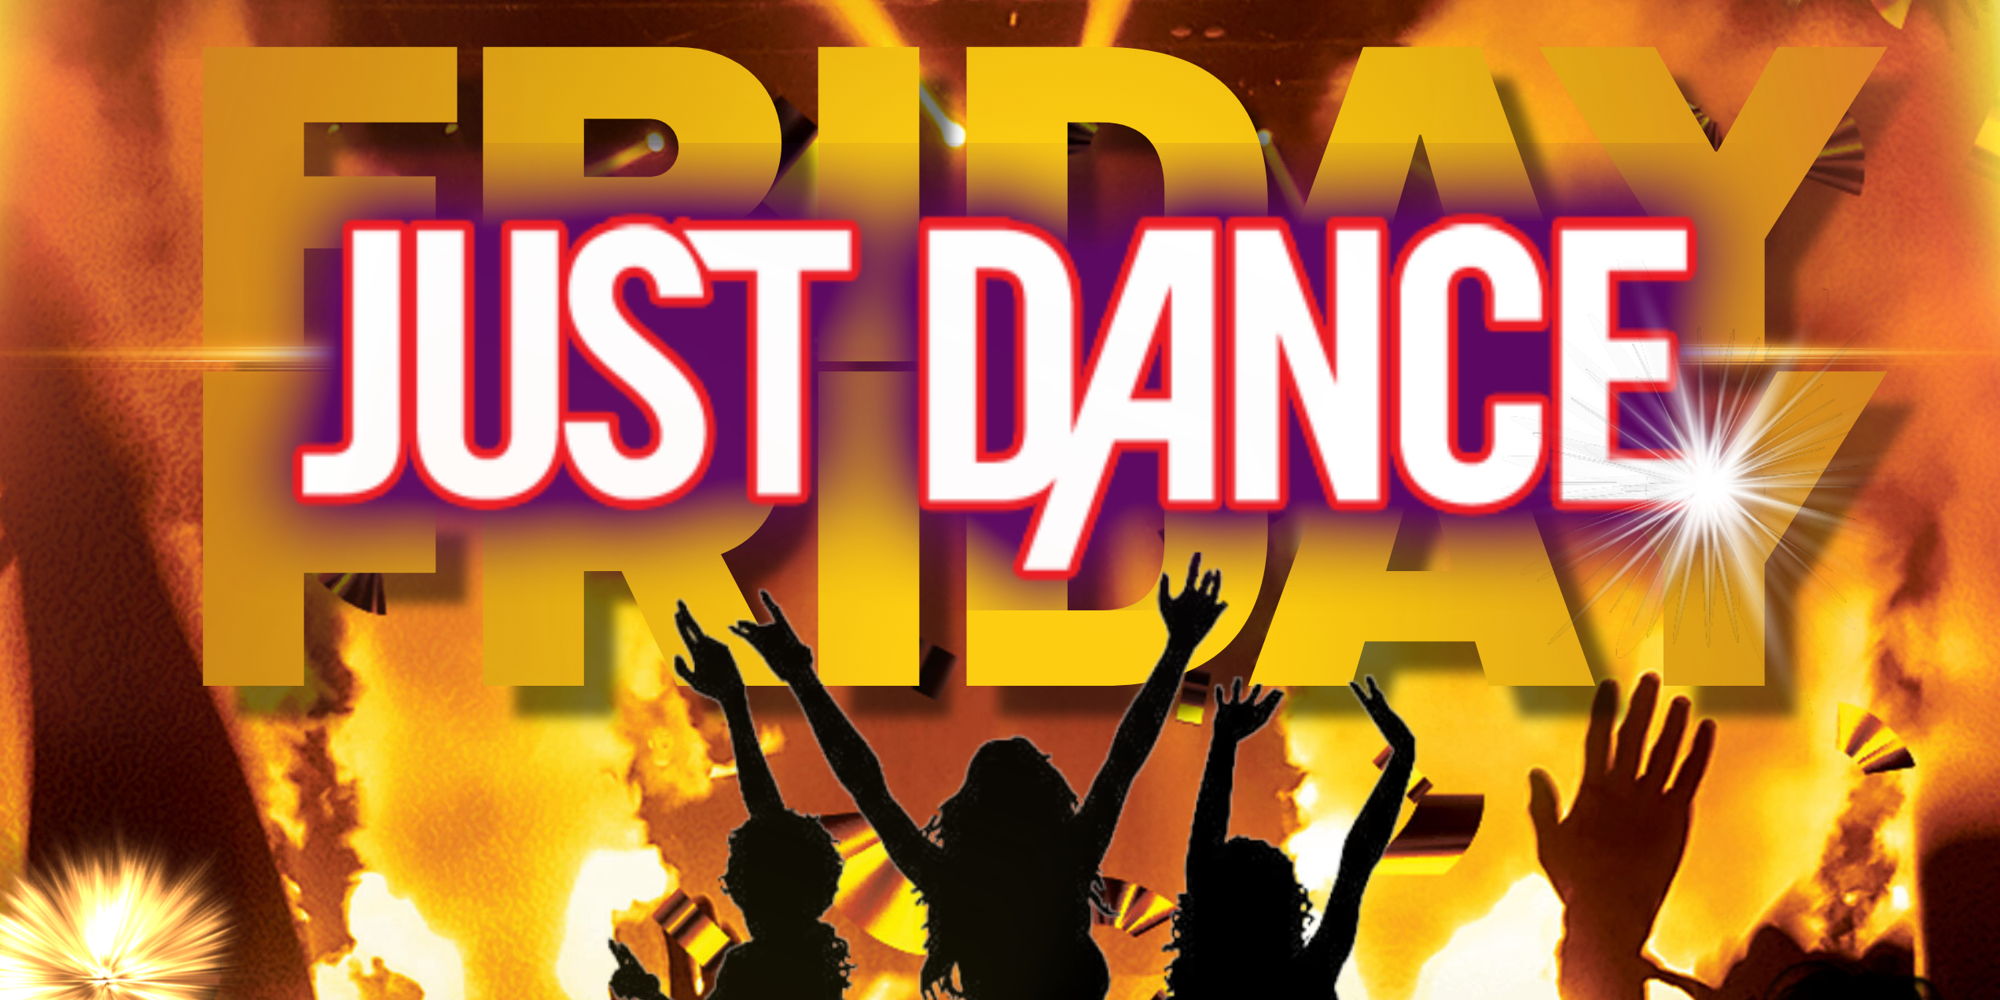 Just Dance promotional image